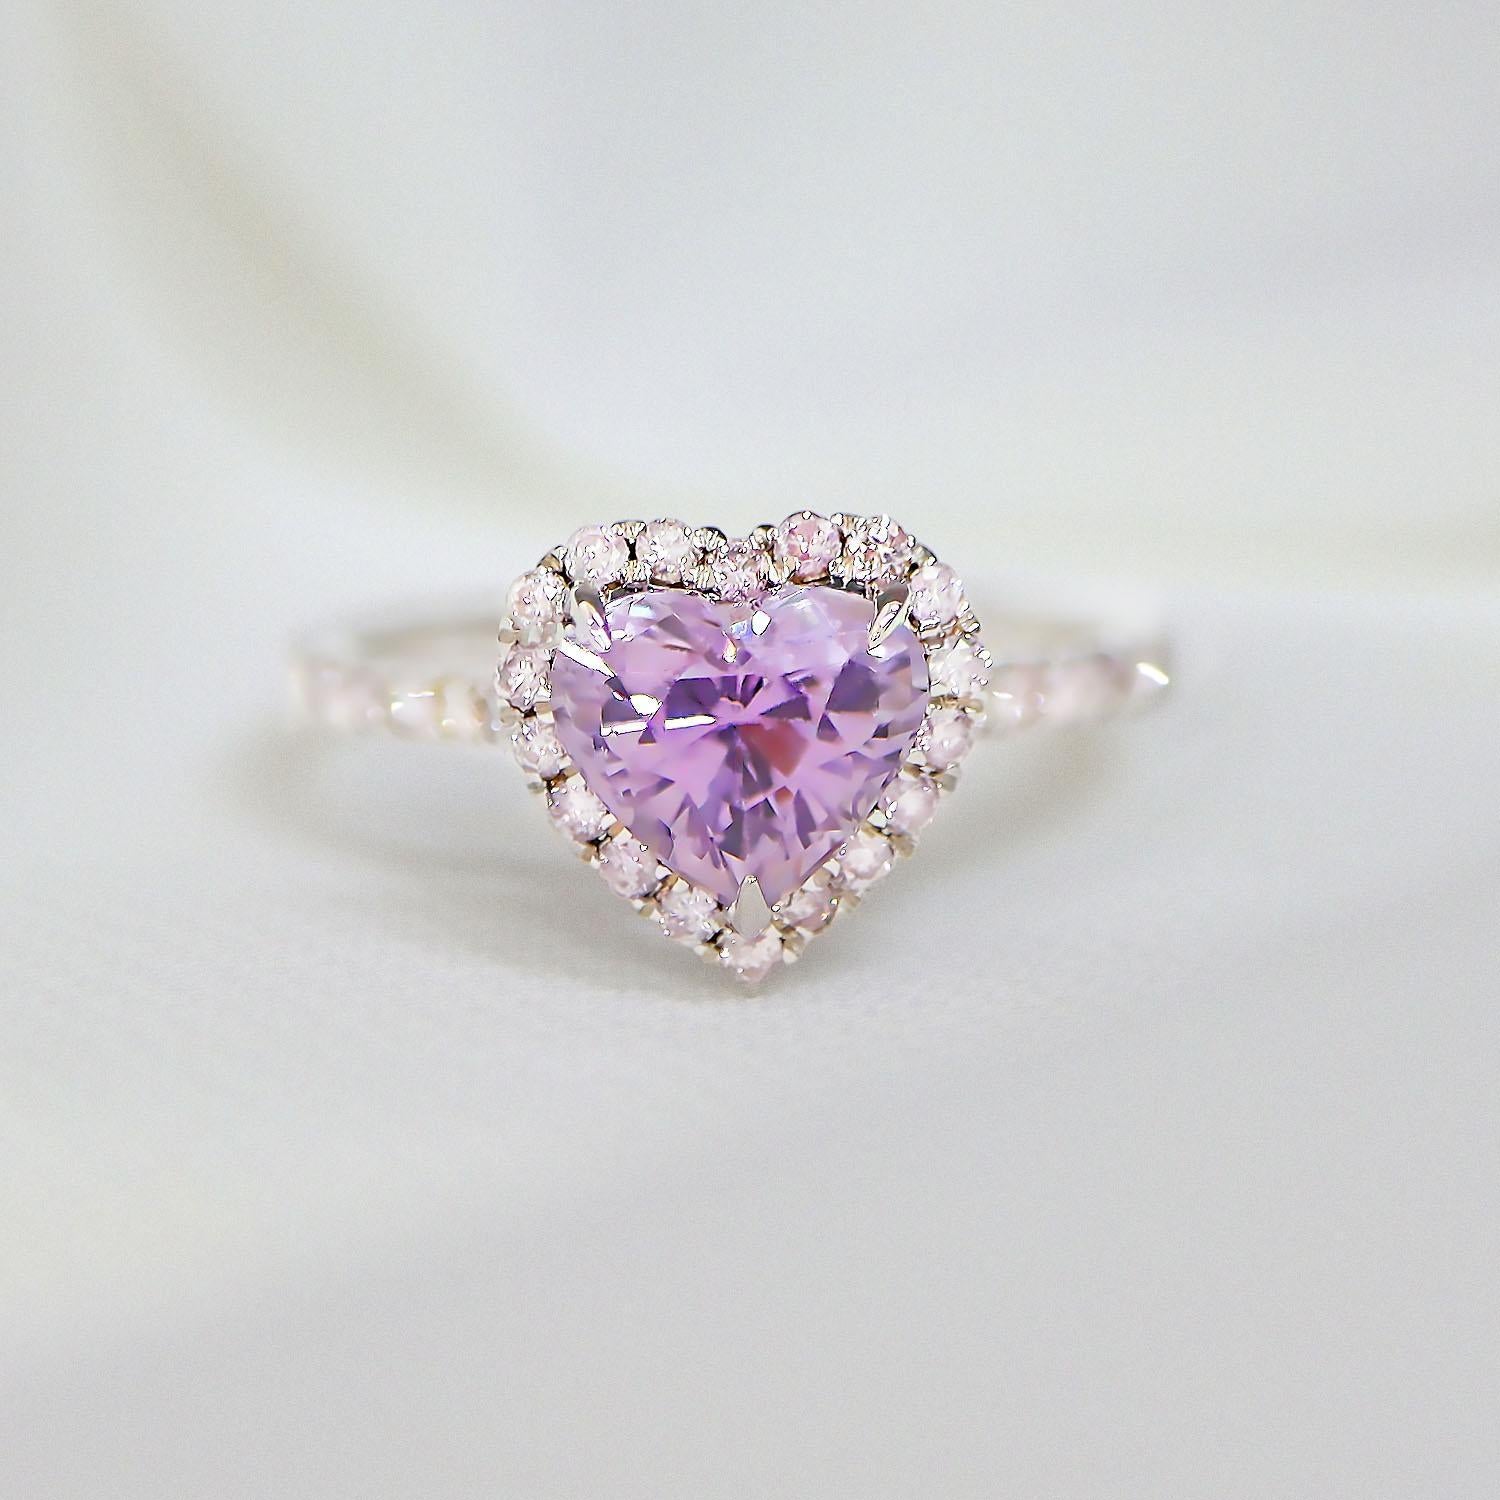 *IGI 14K 1.73 Ct Purple Spinel&Pink Diamonds Antique Engagement Ring*

IGI-certified natural untreated purple spinel weighing 1.73 ct set on 14K white gold pave' design band with natural pink diamonds weighing 0.34 ct.  

The ring combines fashion